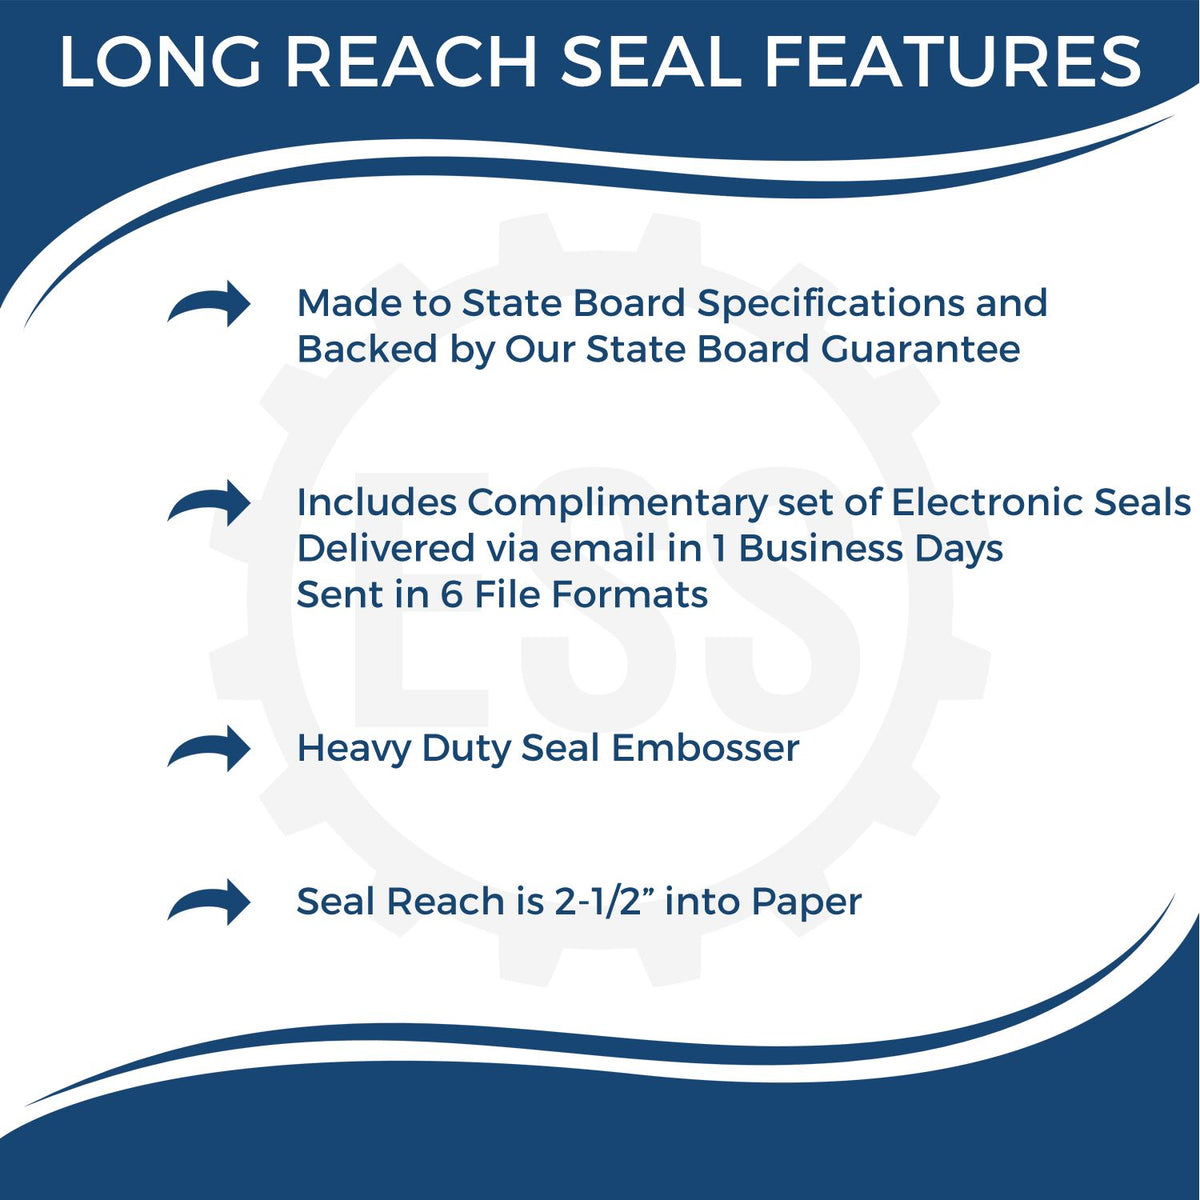 A picture of an infographic highlighting the selling points for the Long Reach New Mexico Geology Seal